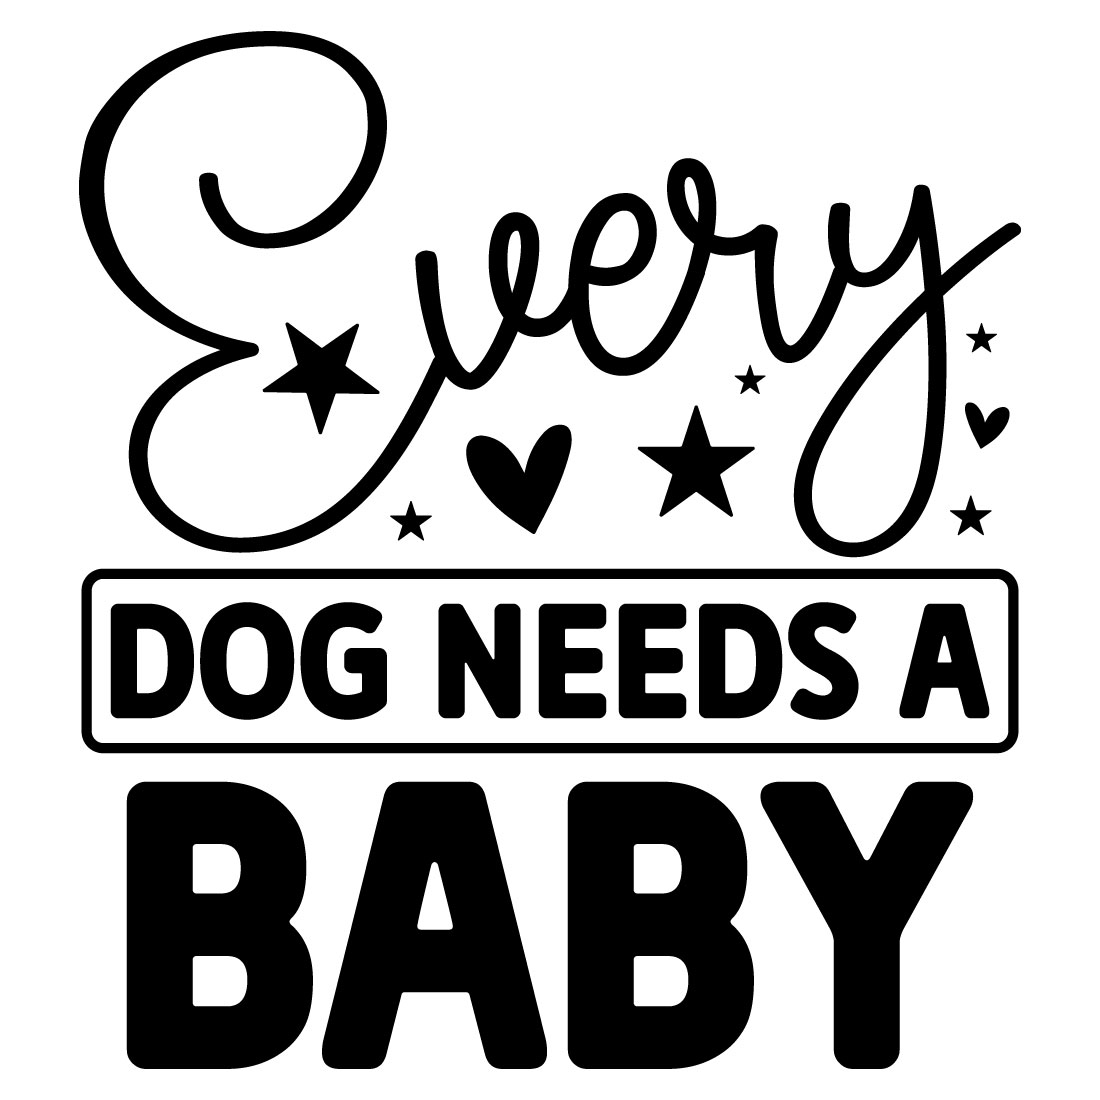 Every Dog Needs a Baby main cover.